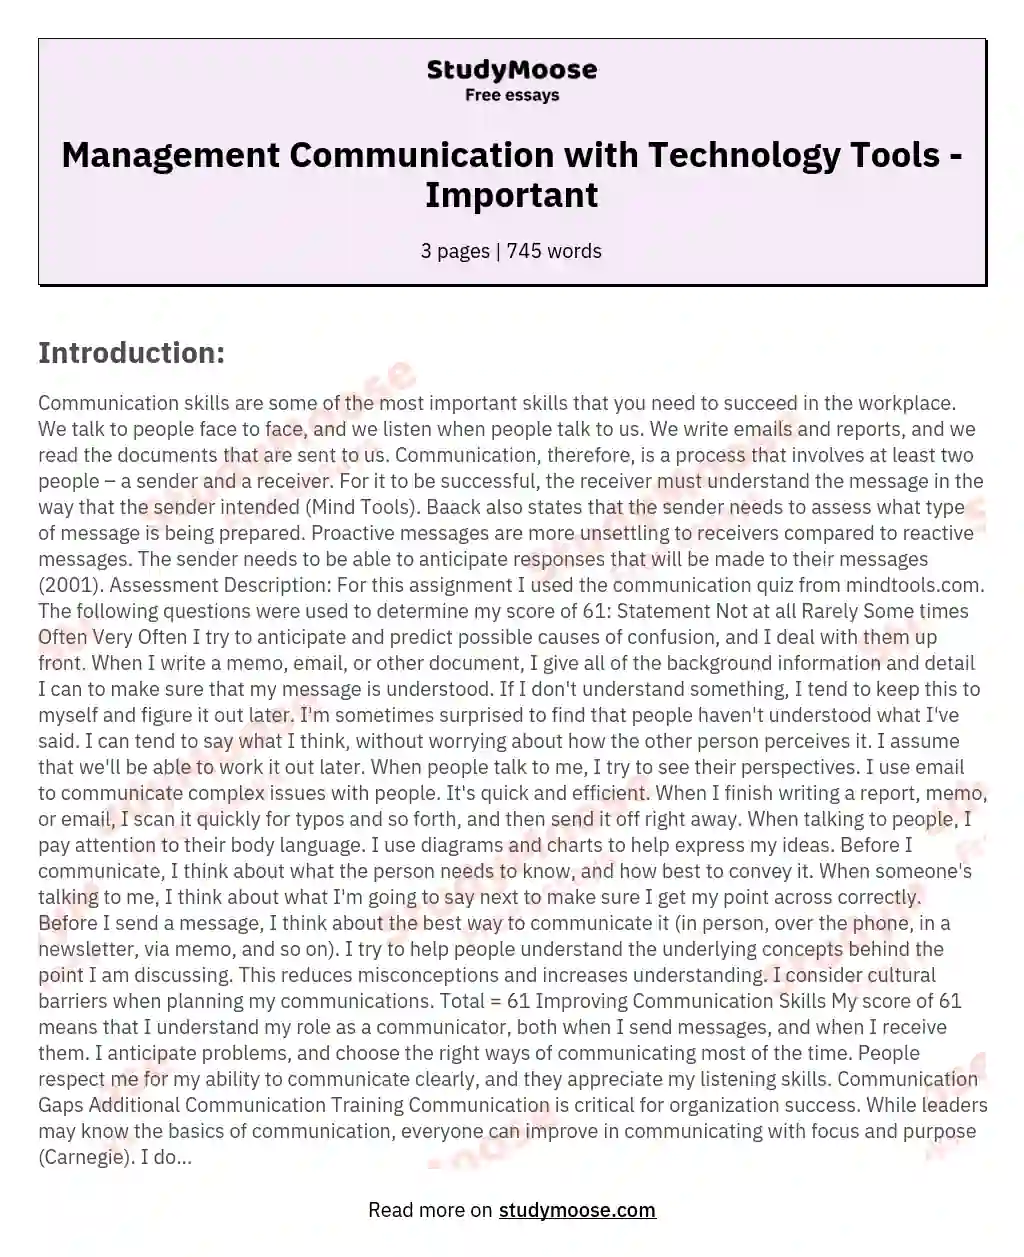 Management Communication with Technology Tools - Important